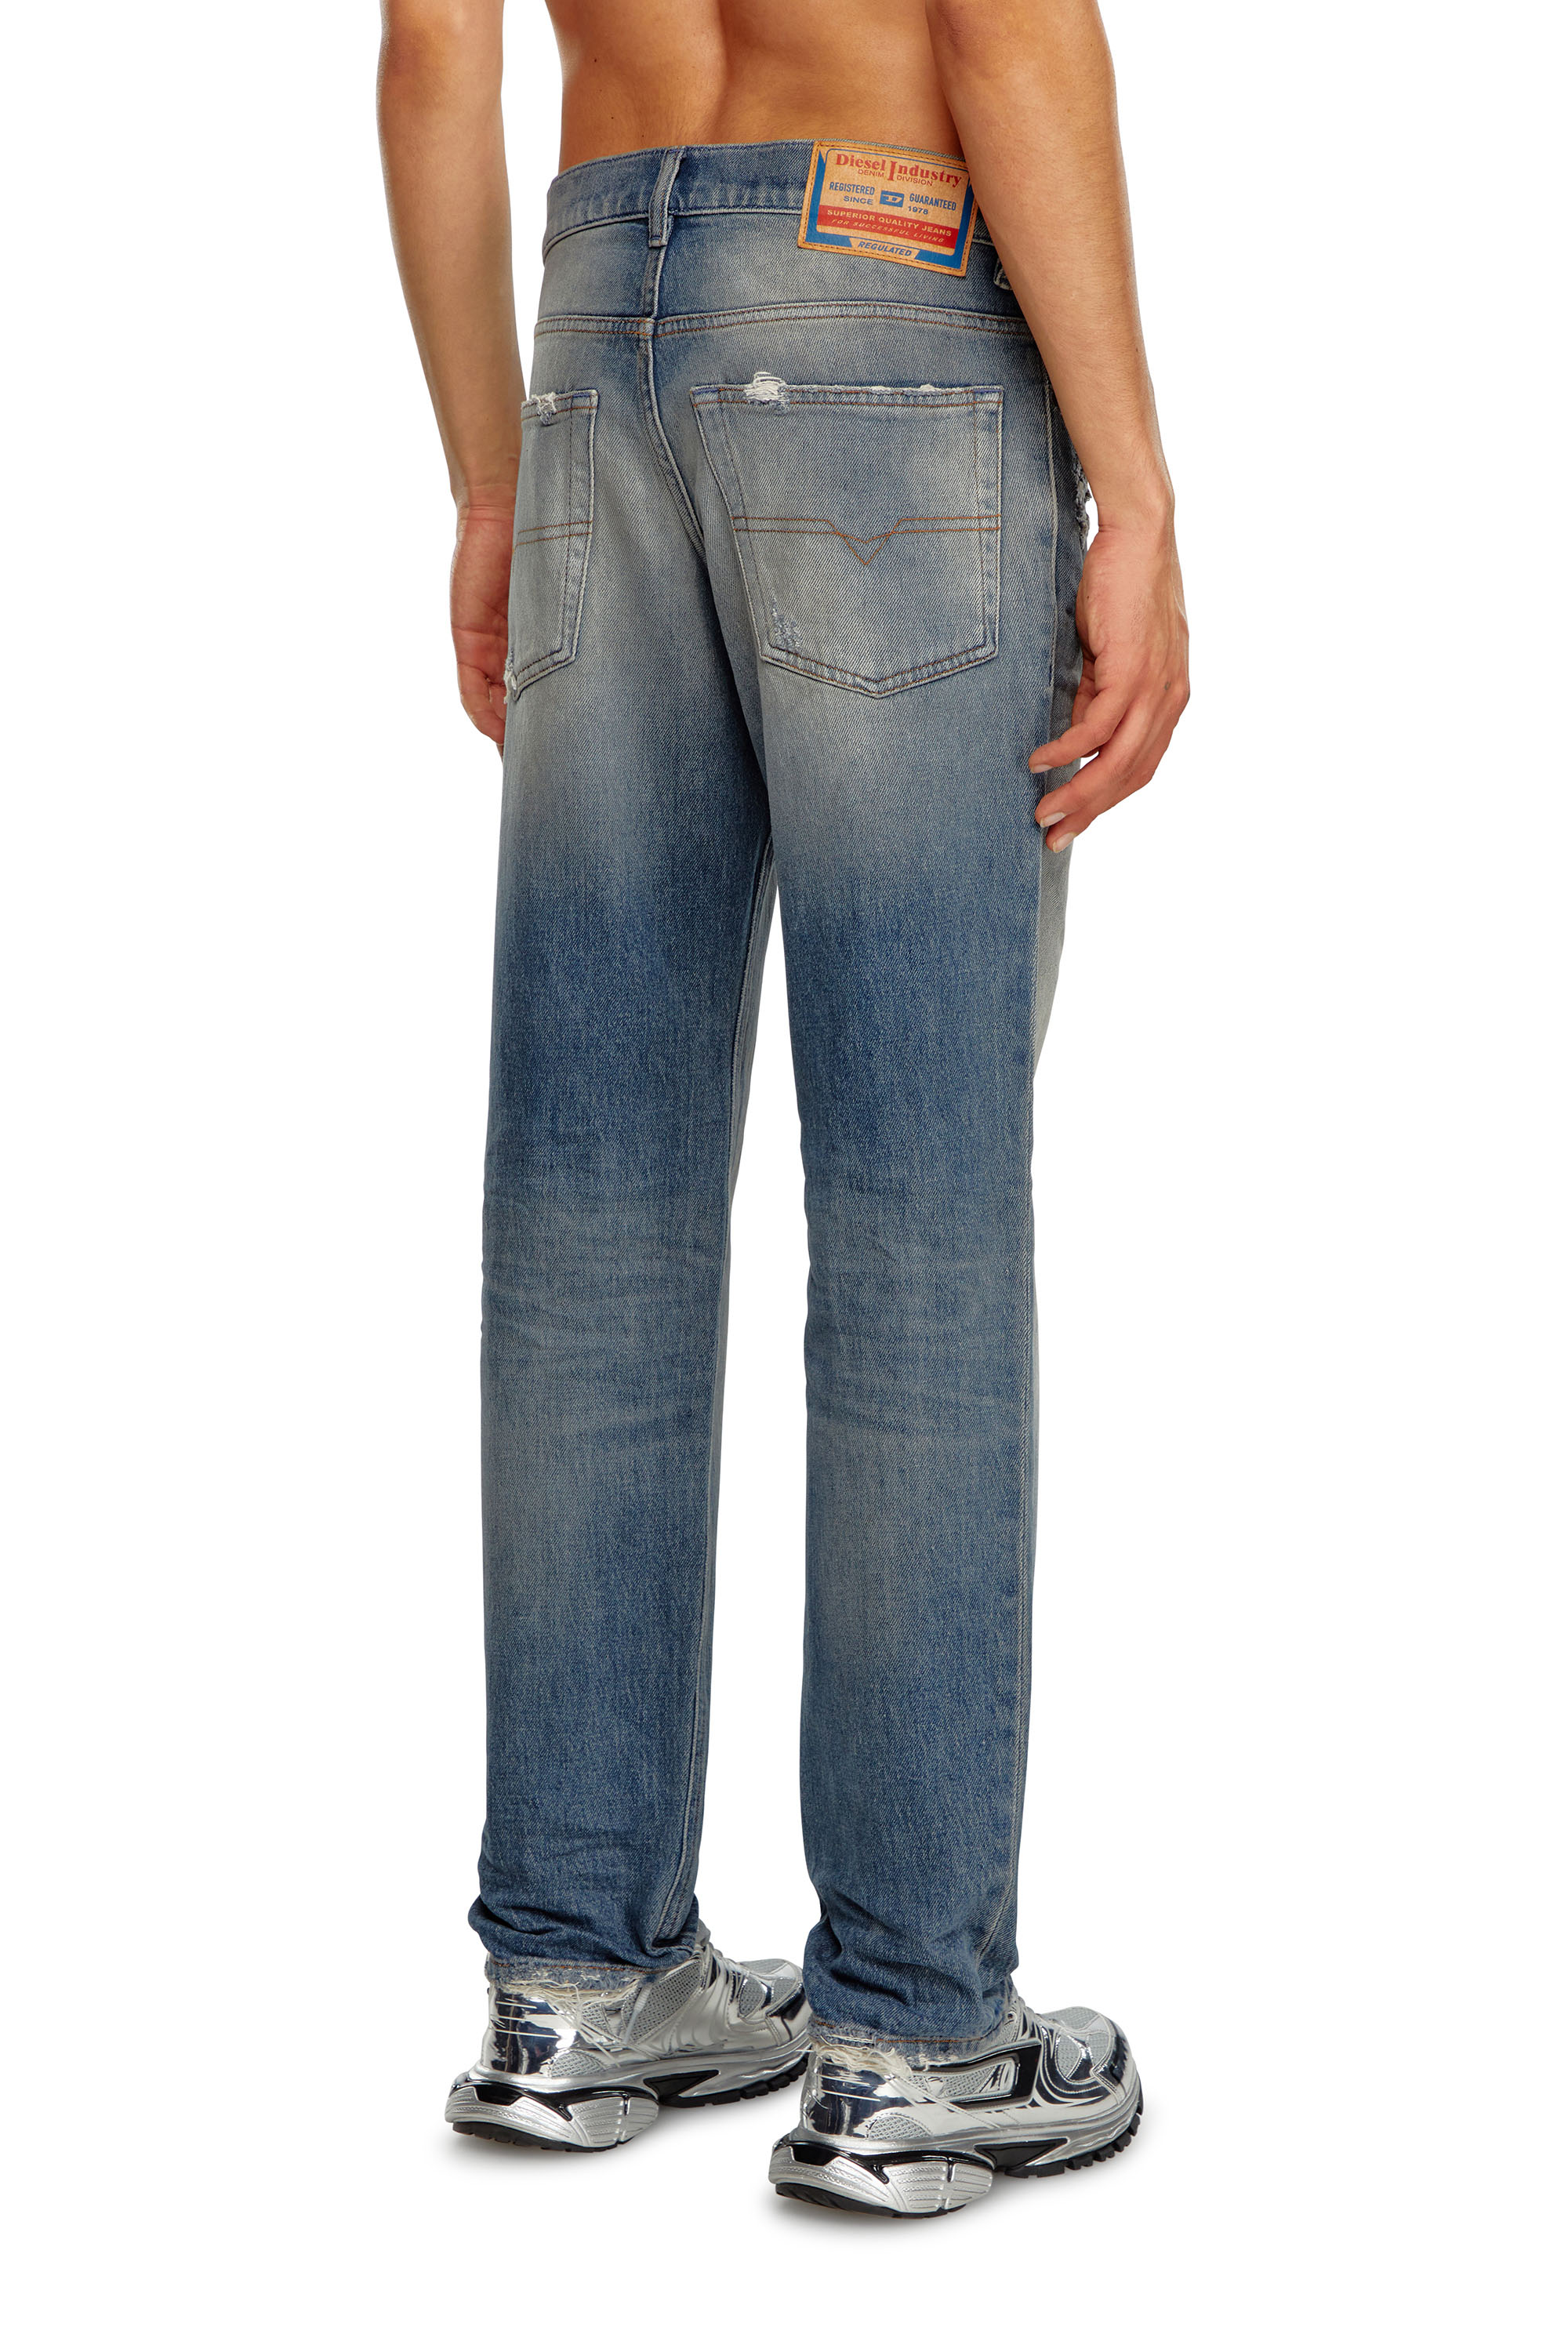 Diesel - Tapered Jeans 2023 D-Finitive 0GRDC, Hombre Tapered Jeans - 2023 D-Finitive in Azul marino - Image 4